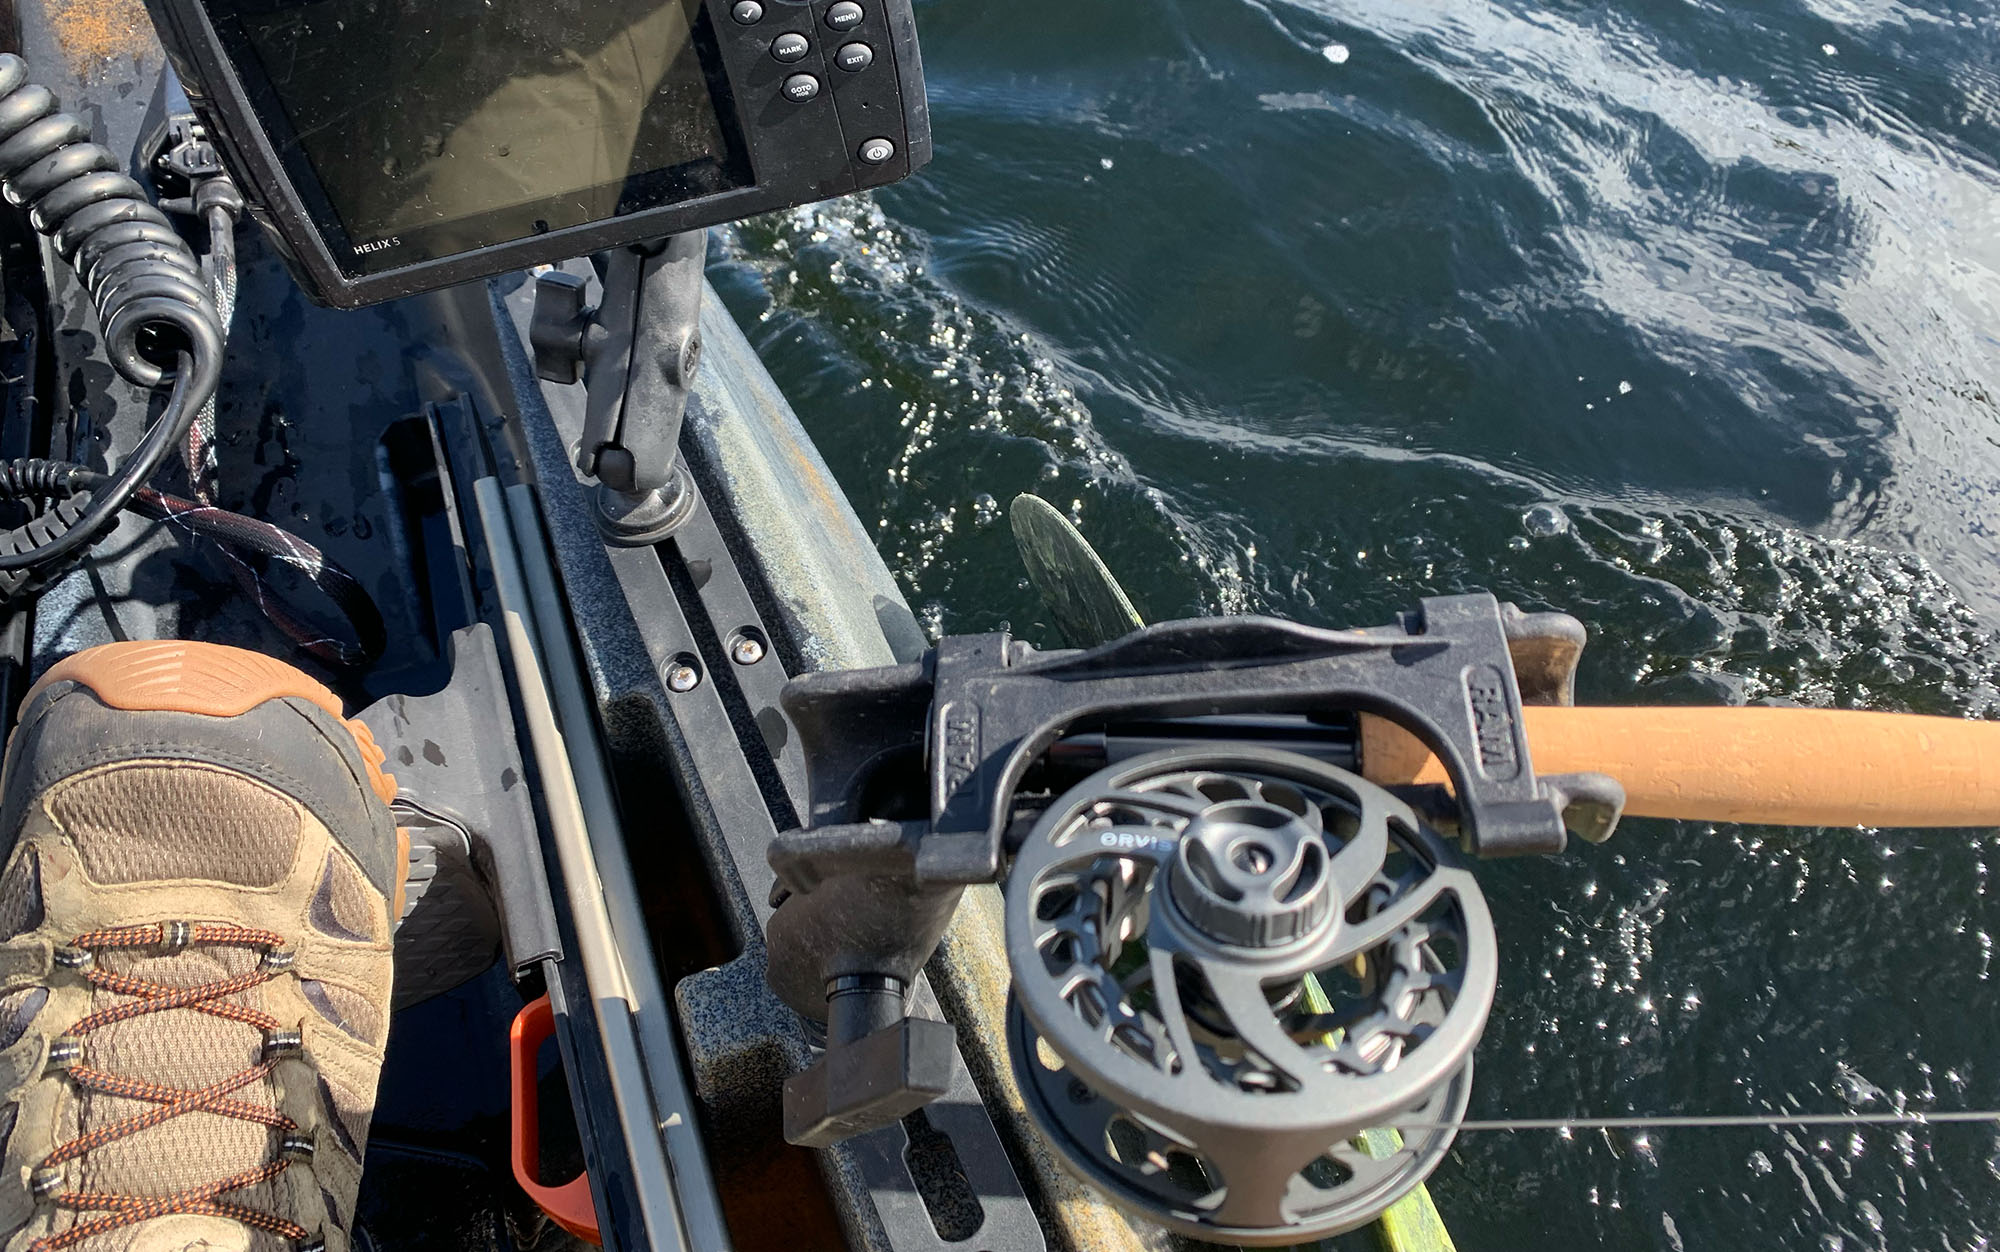 There is plenty of room for accessories even with a fish finder mounted.